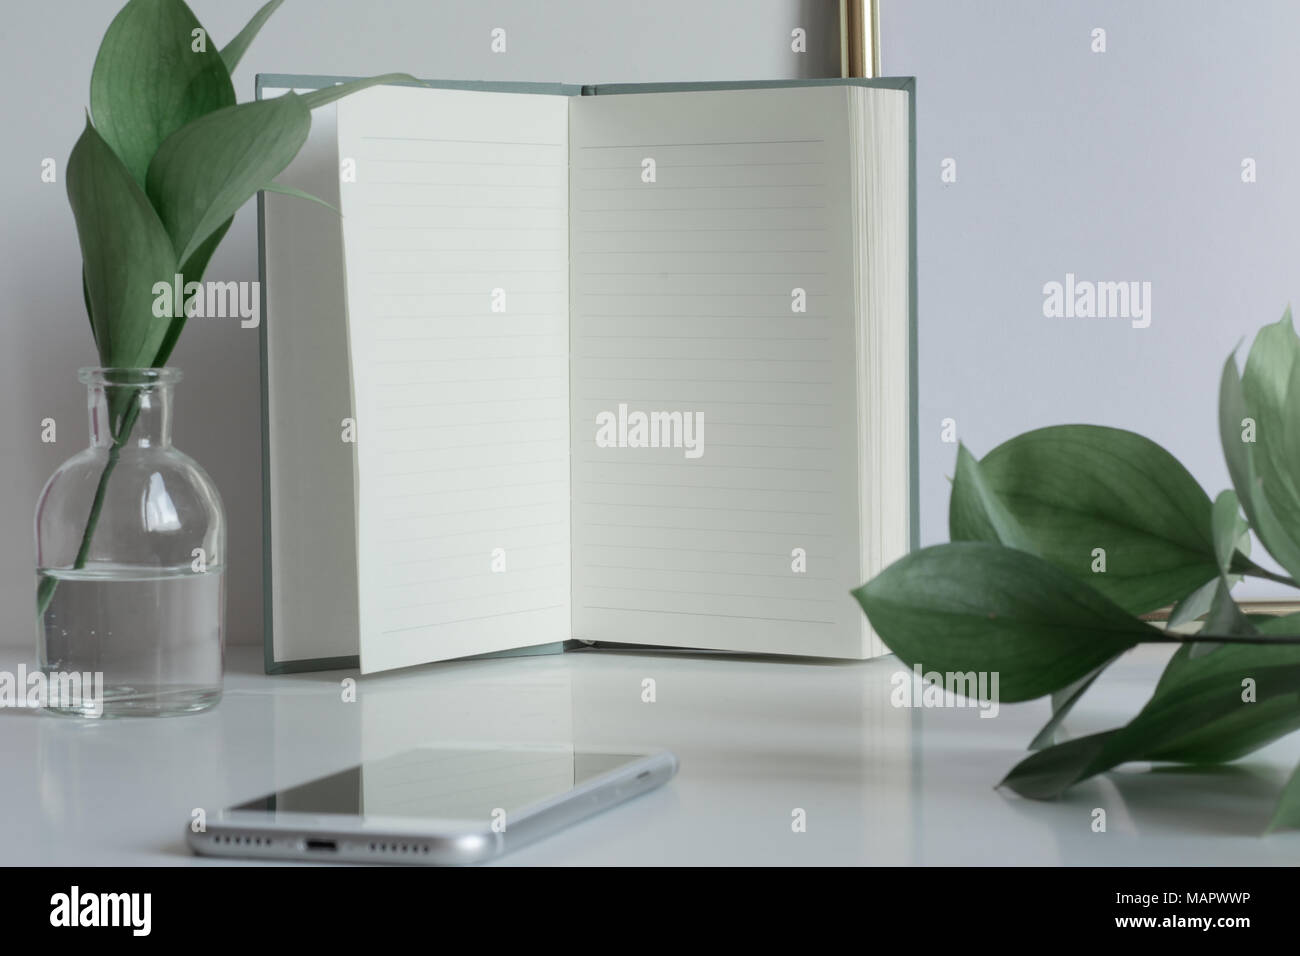 Business desktop with notebook pages, glass vase and green leaves Stock Photo